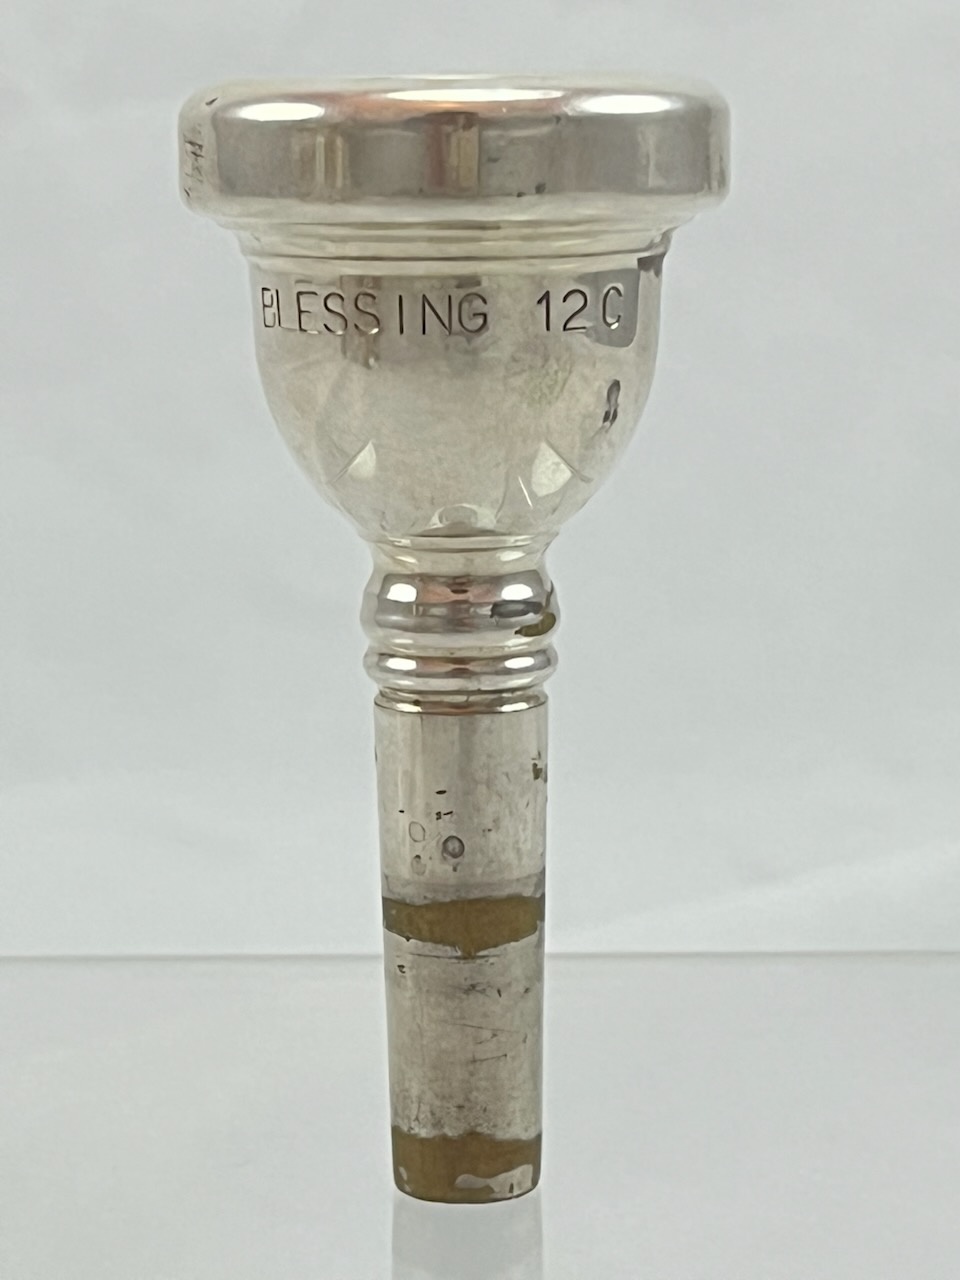 Blessing Used Blessing 12C Trombone Mouthpiece